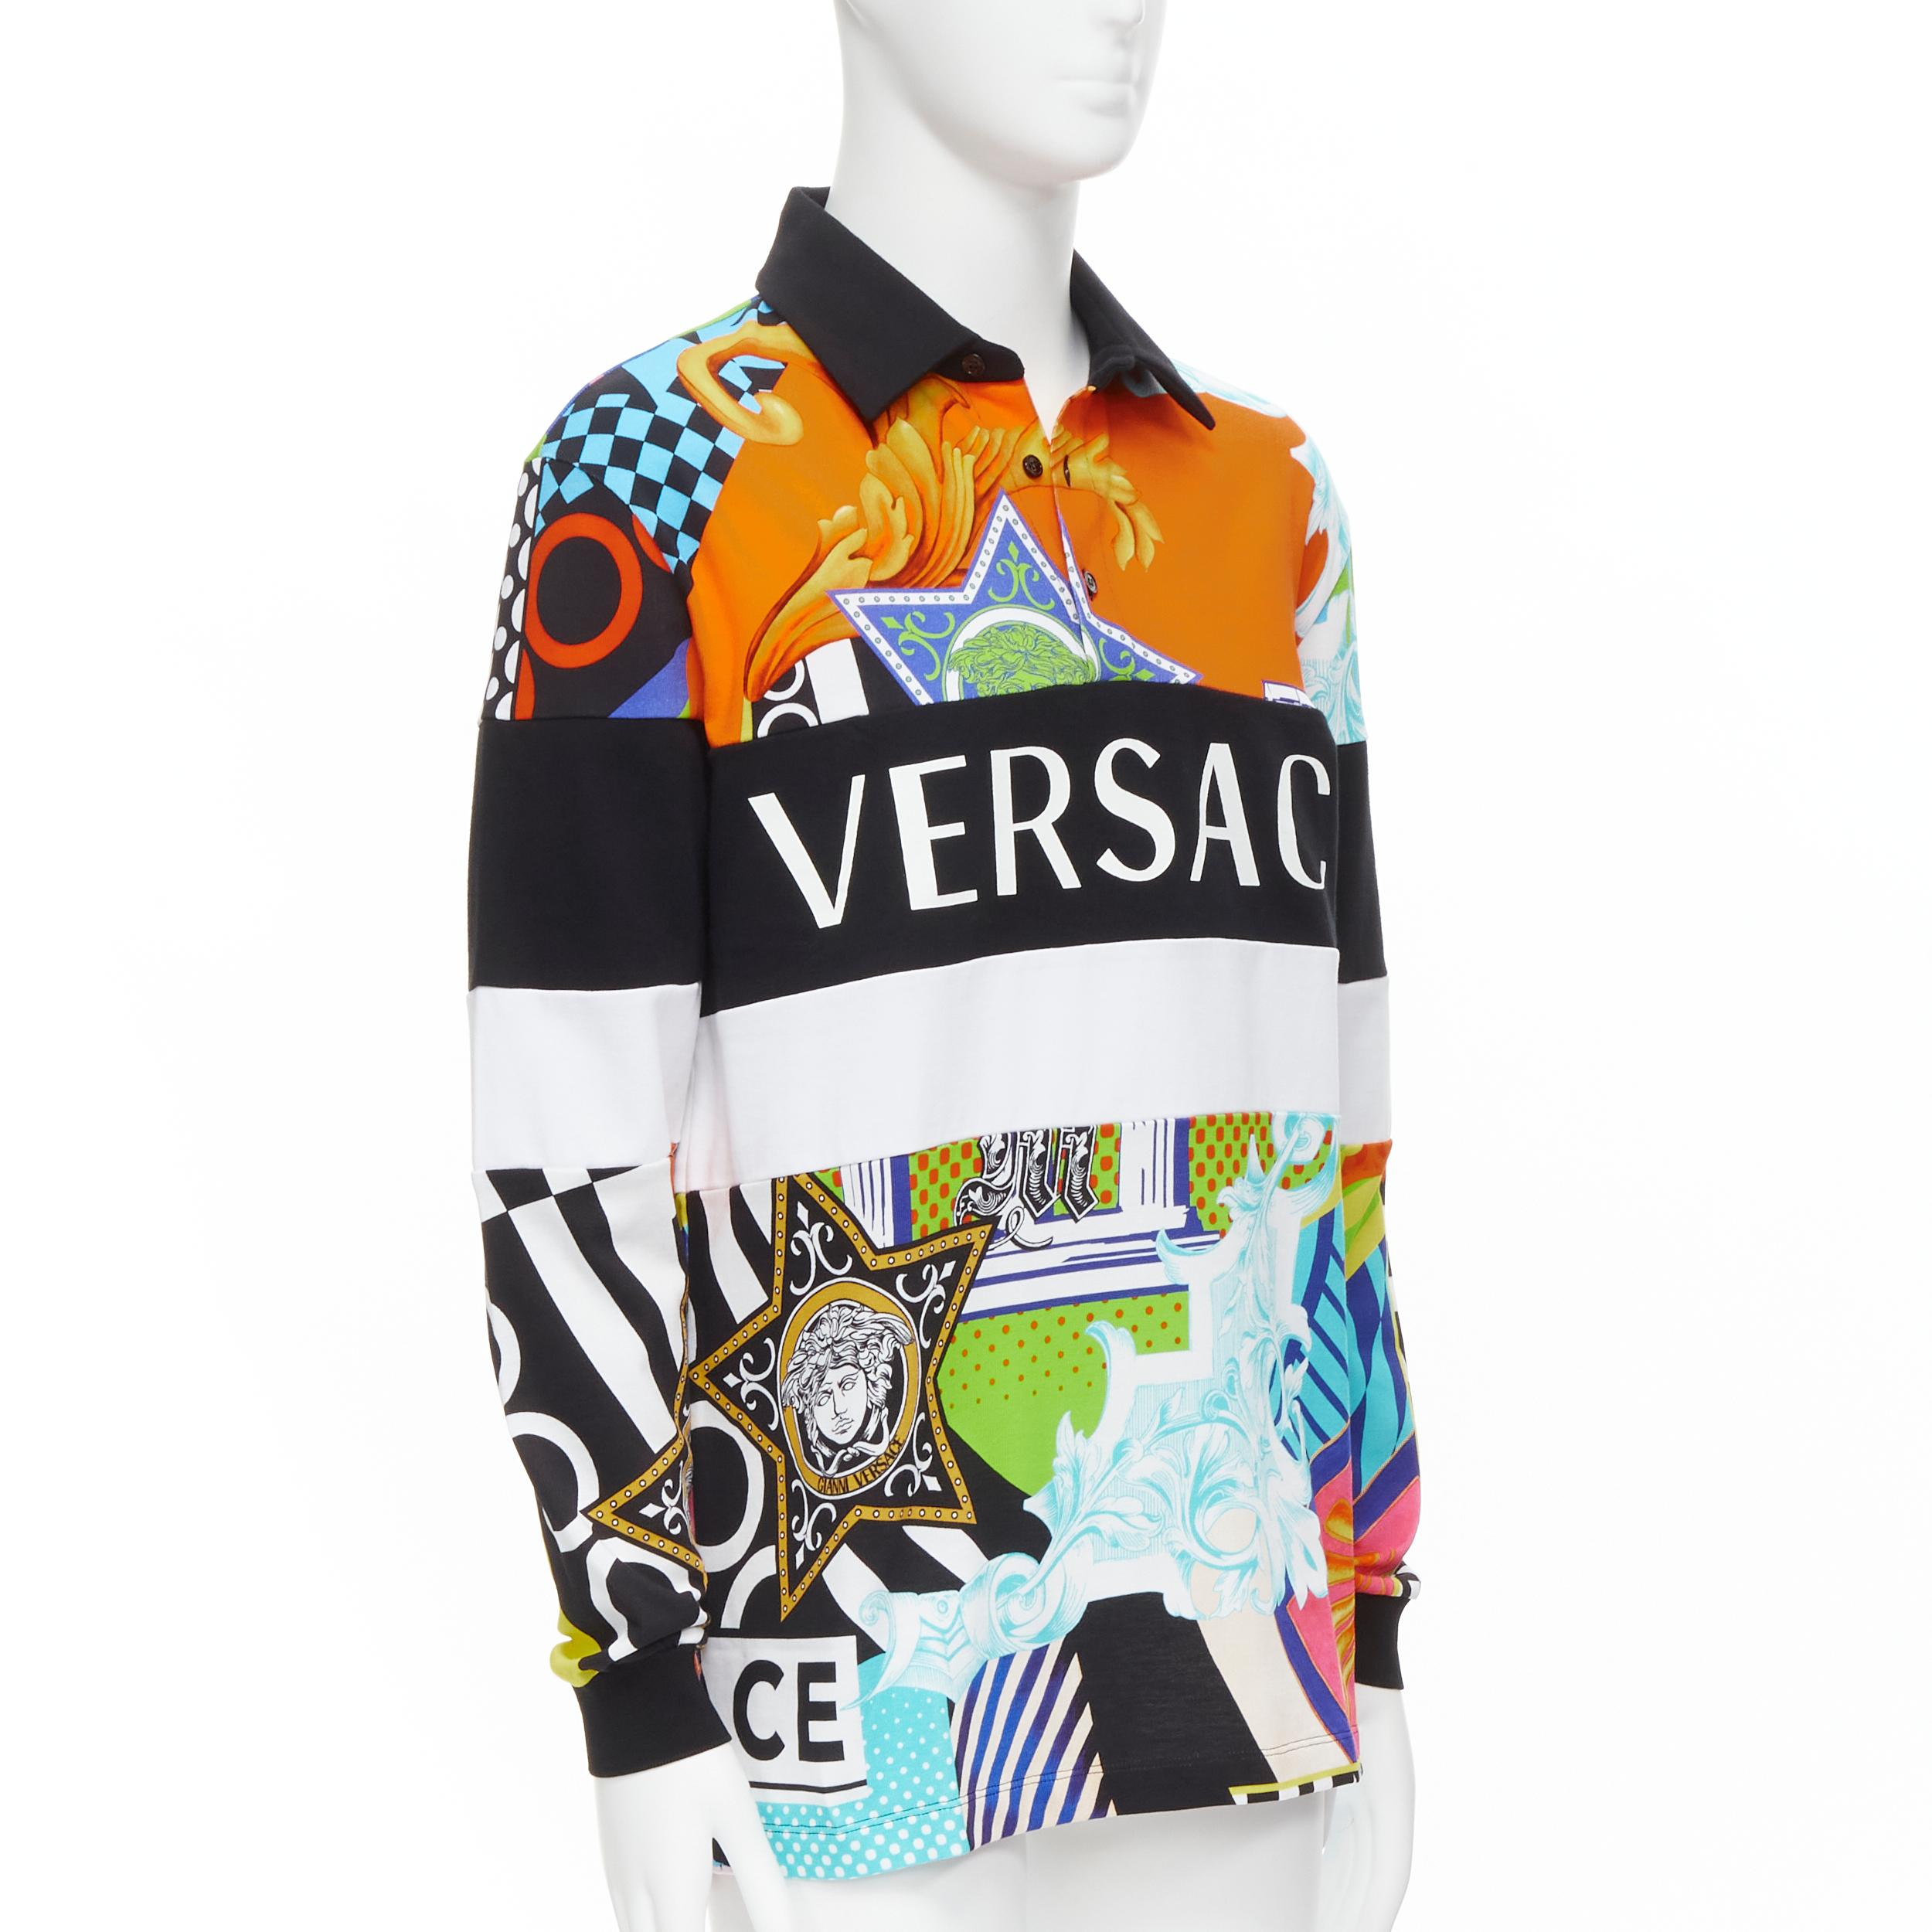 new VERSACE 2020 Runway Pop Temple Box logo patchwork polo shirt top M
Reference: TGAS/C00984
Brand: Versace
Designer: Donatella Versace
Collection: Pop Temple Spring Summer 2020 Limited Edition Runway
Material: Cotton
Color: Multicolor
Pattern: